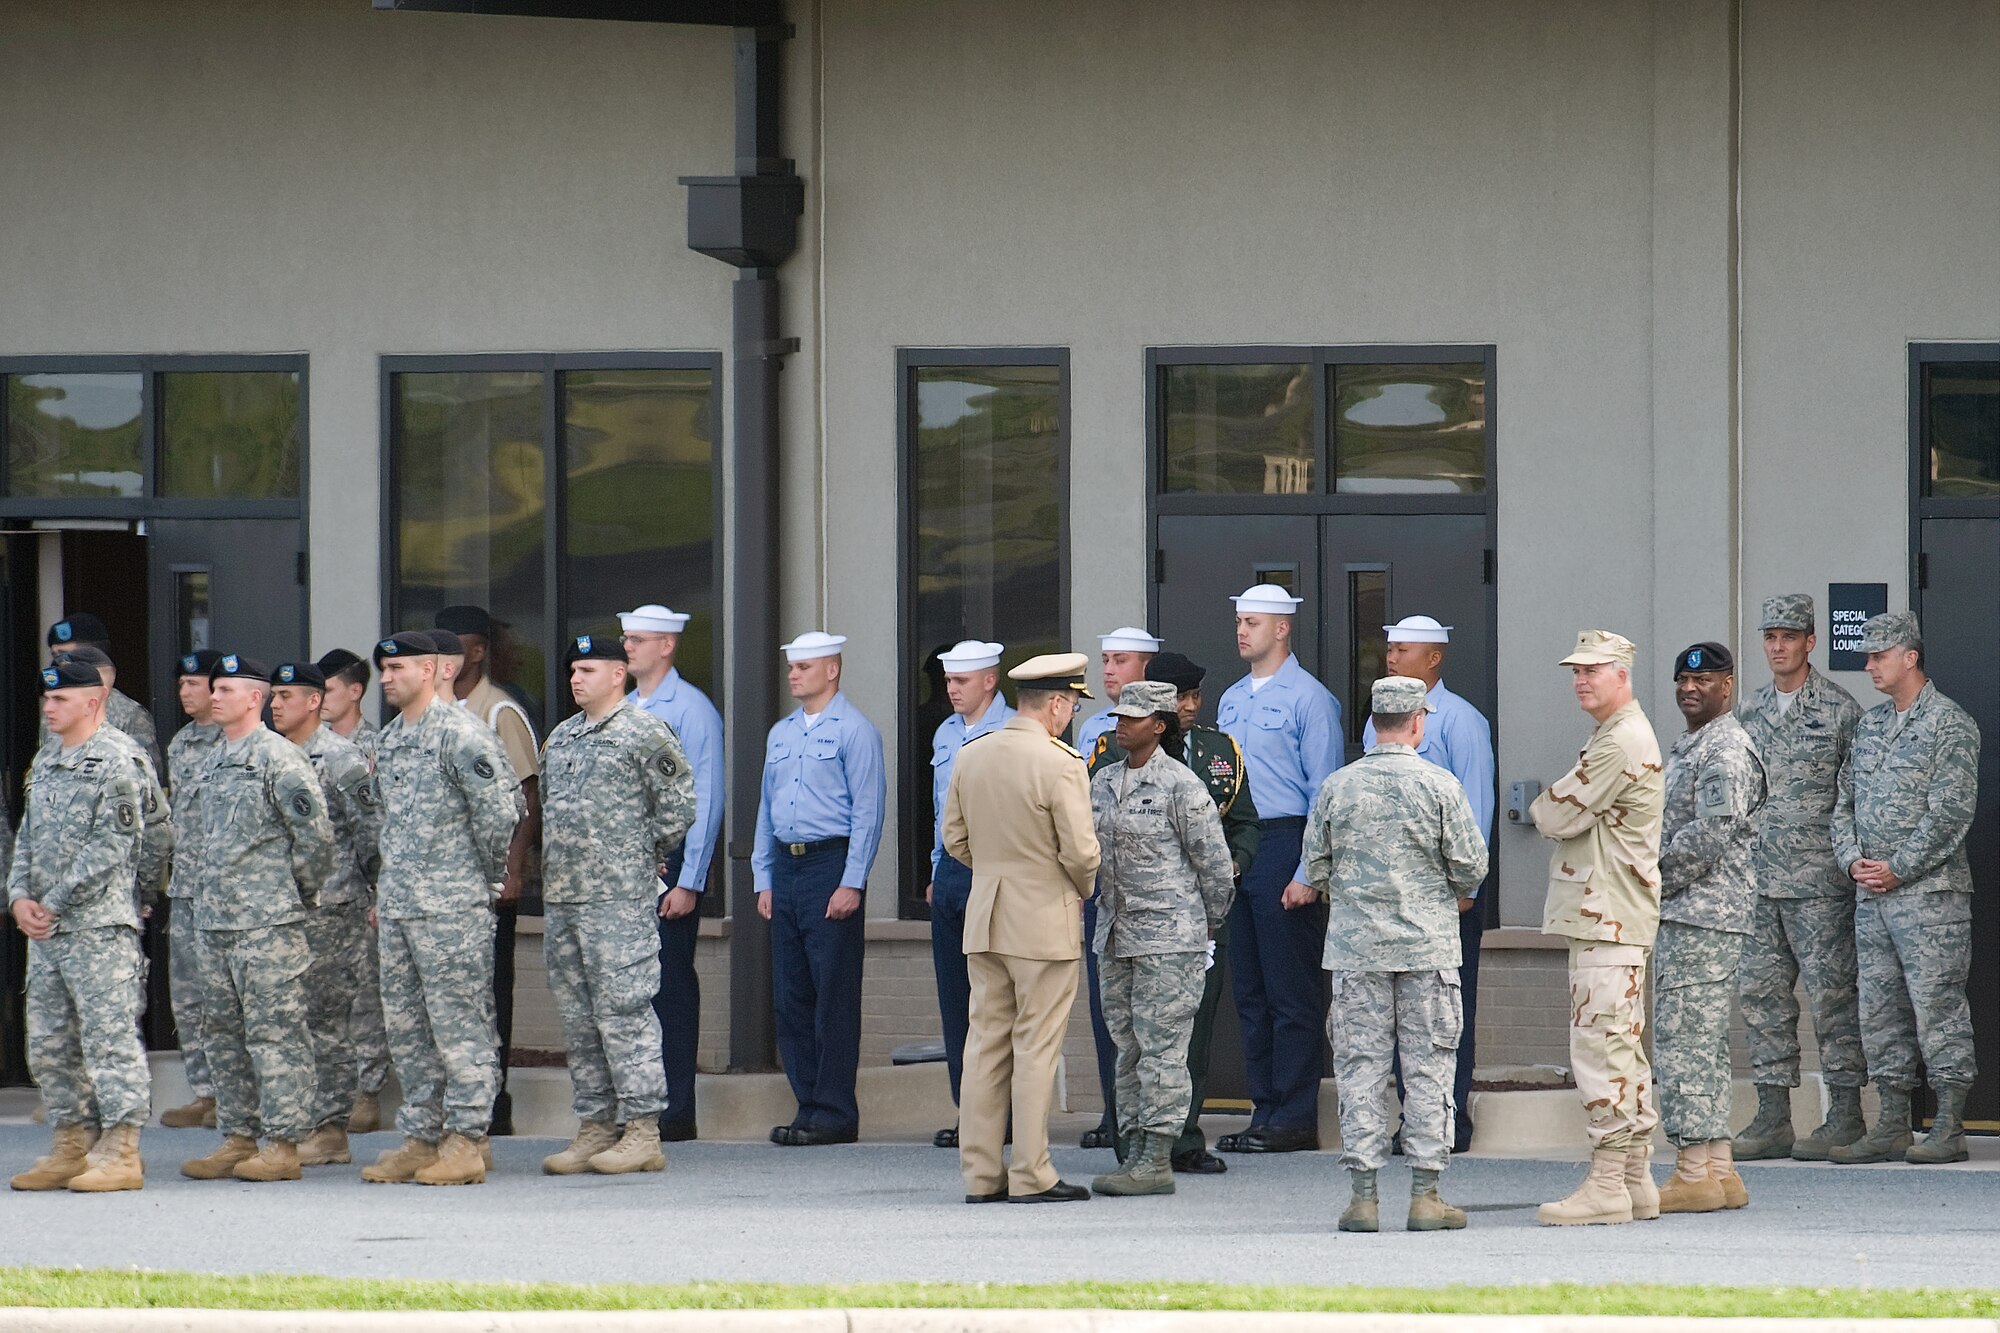 Navy Admiral Mike Mullen, chairman of the Joint Chiefs of Staff, shows his appreciation to the military members taking part in the Dignified Transfer held at Dover AFB July 8. (U.S. Air Force photo/Roland Balik)